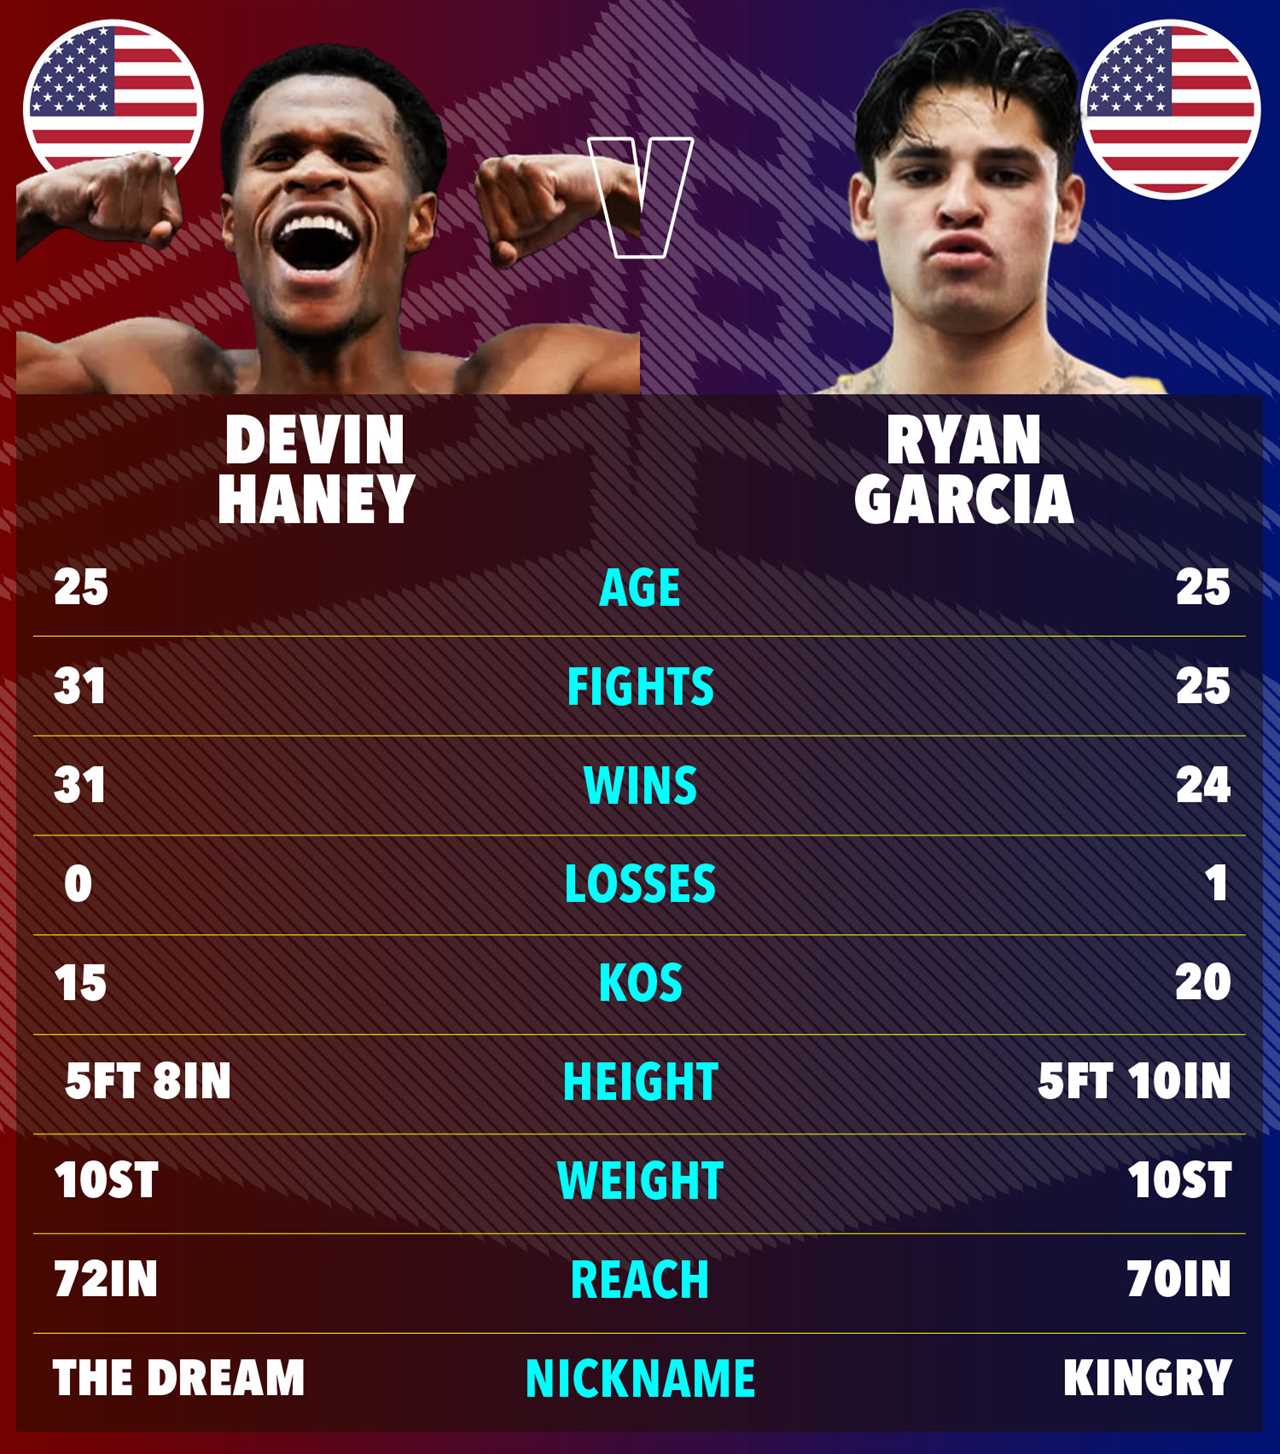 Ryan Garcia launches foul mouthed rant ahead of fight with Devin Haney